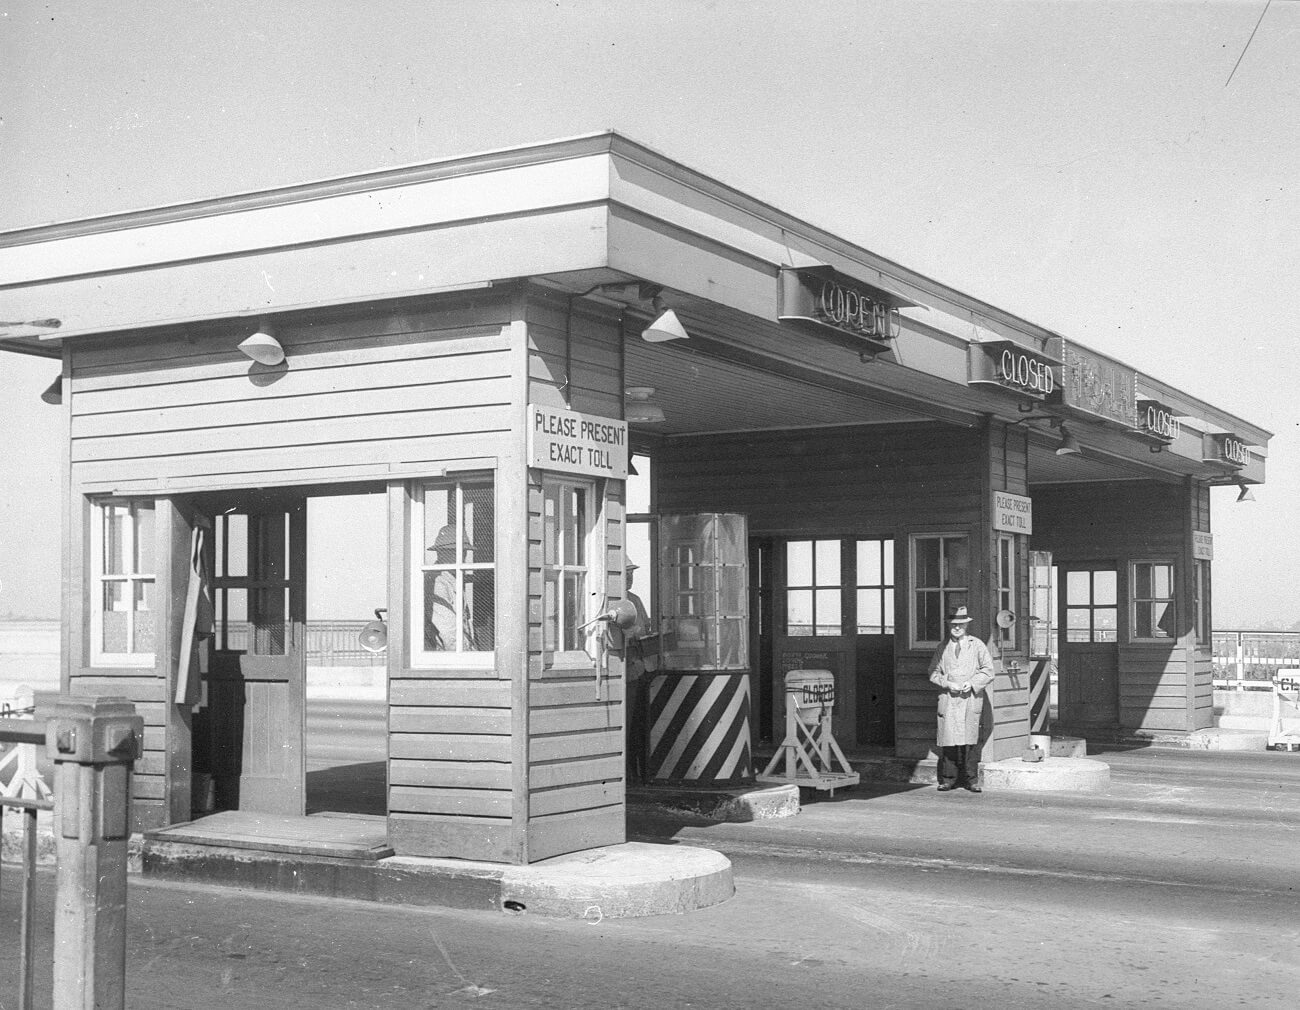 Sydney Harbour Bridge toll gates, photograph by Hall and Co, 1933, Home and Away – 35255
